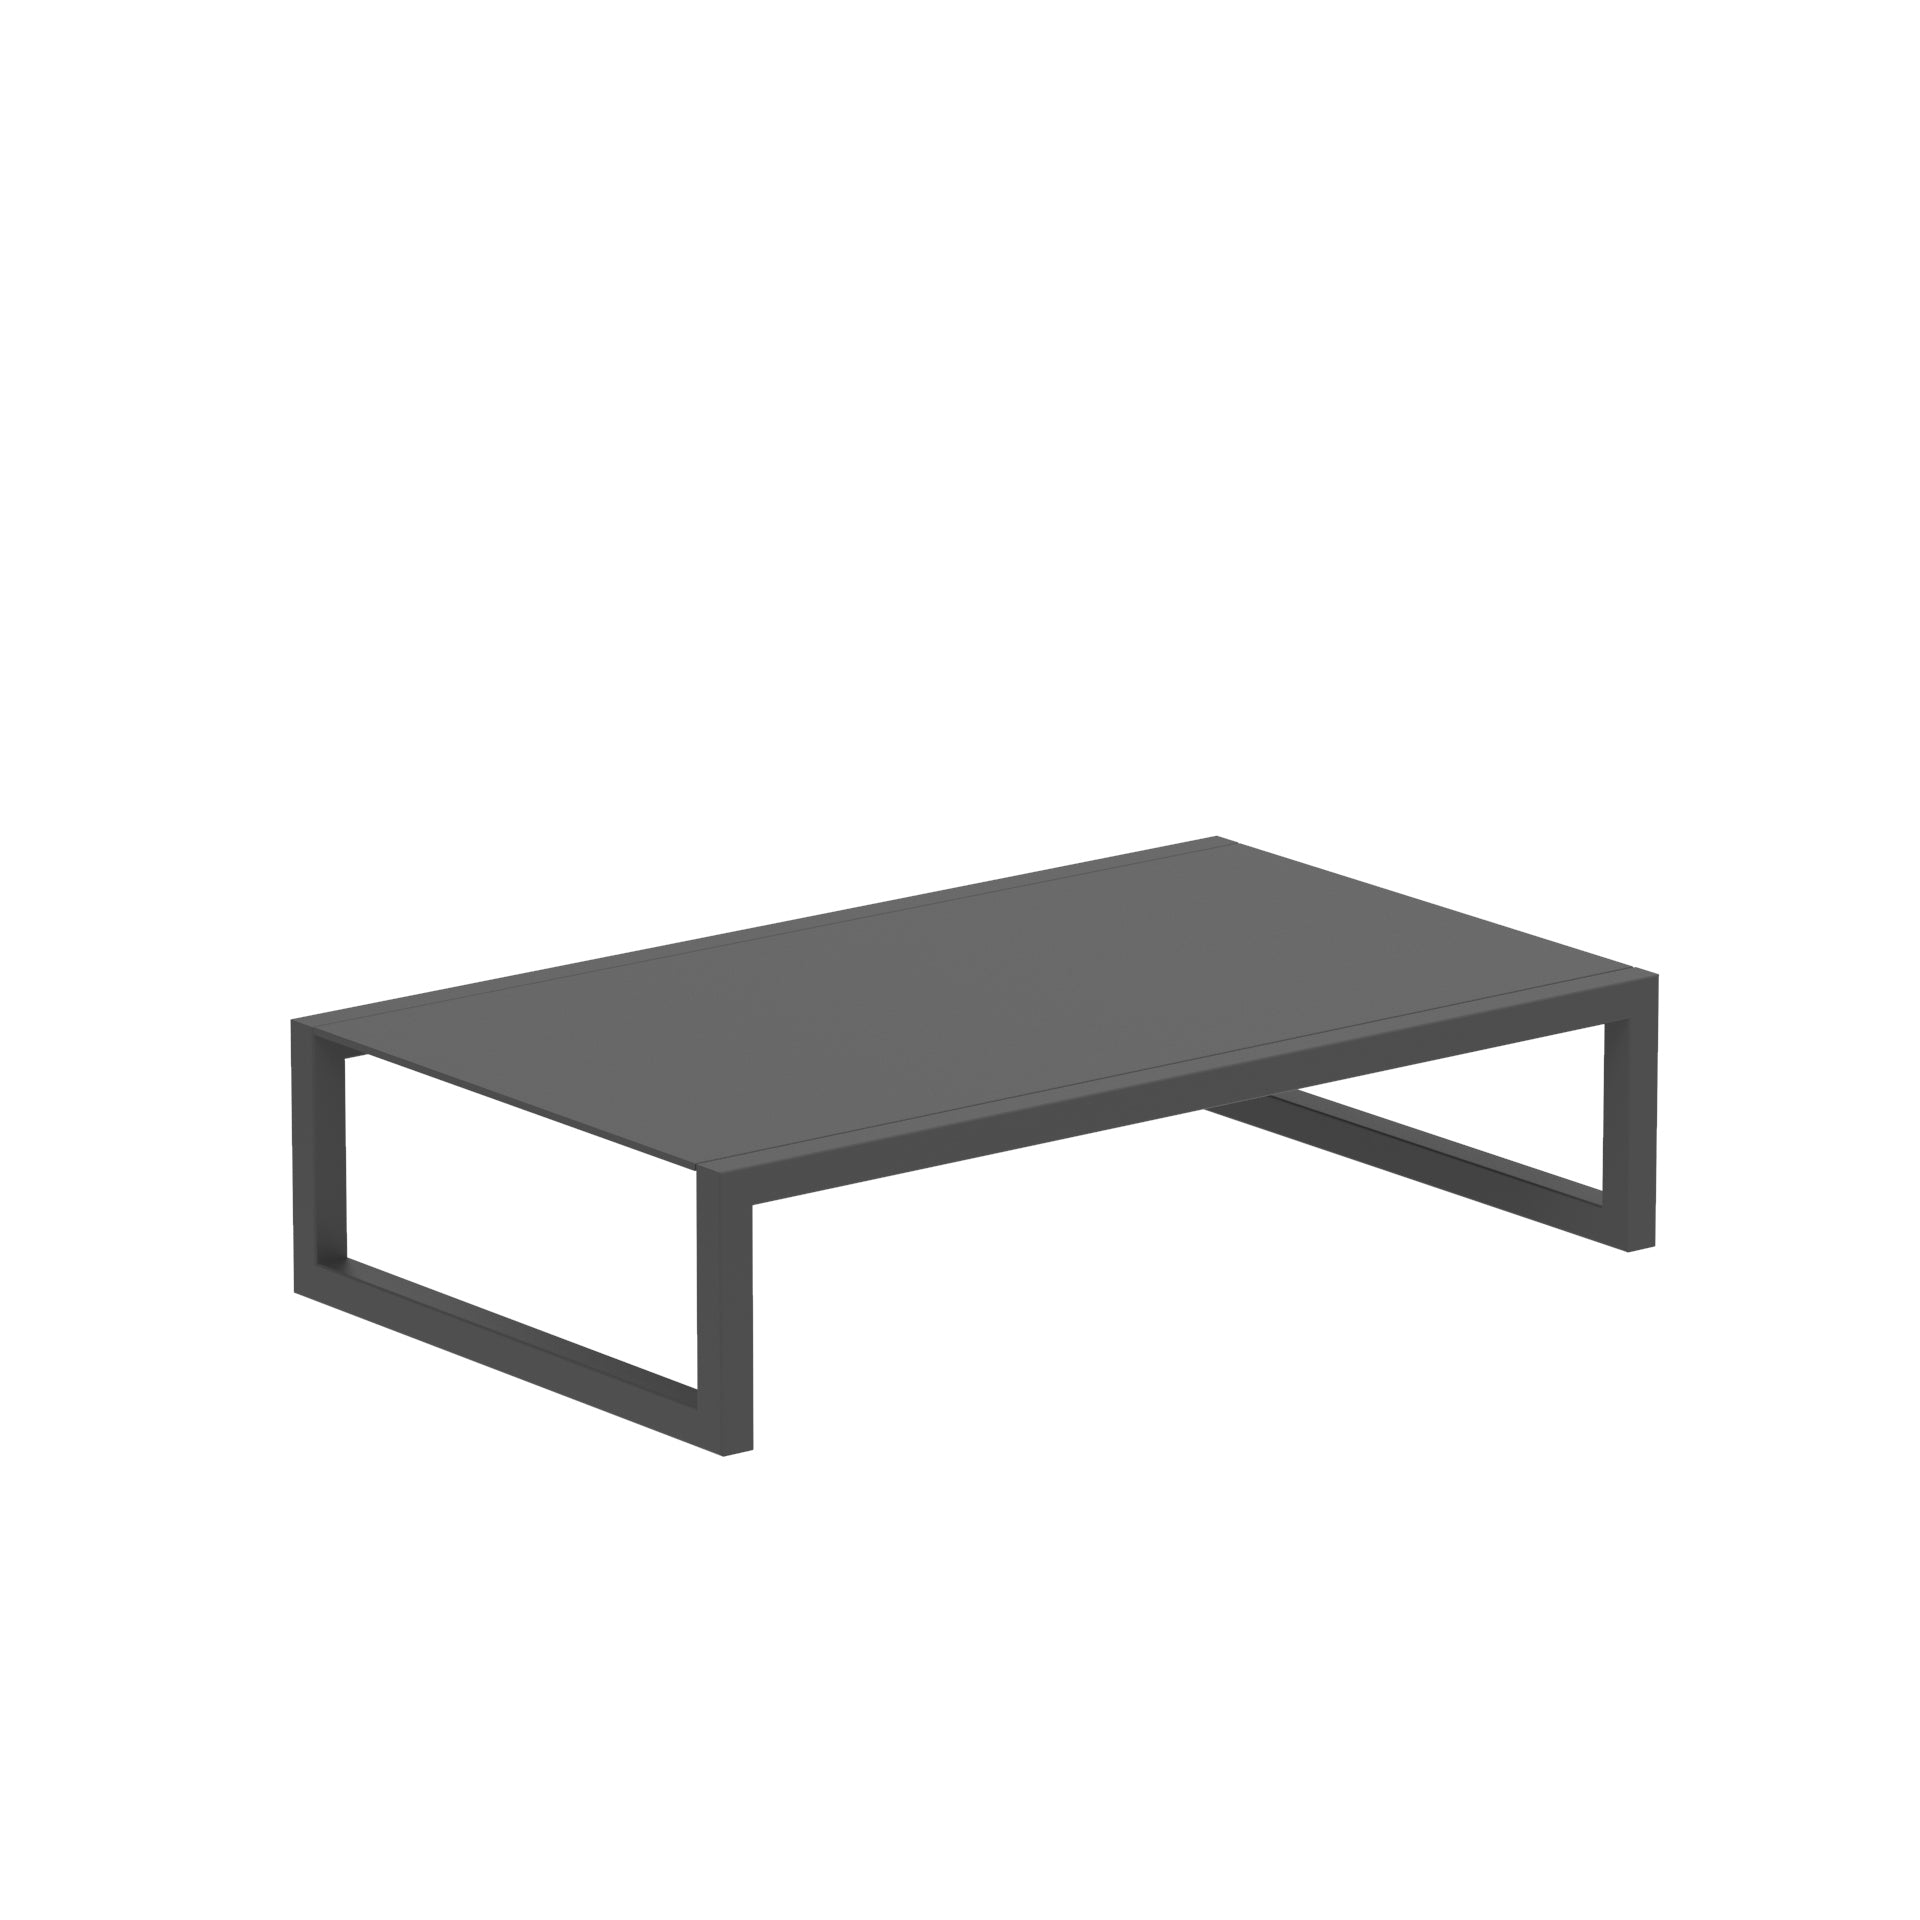 Ninix Powder-coated Low Tables in Black